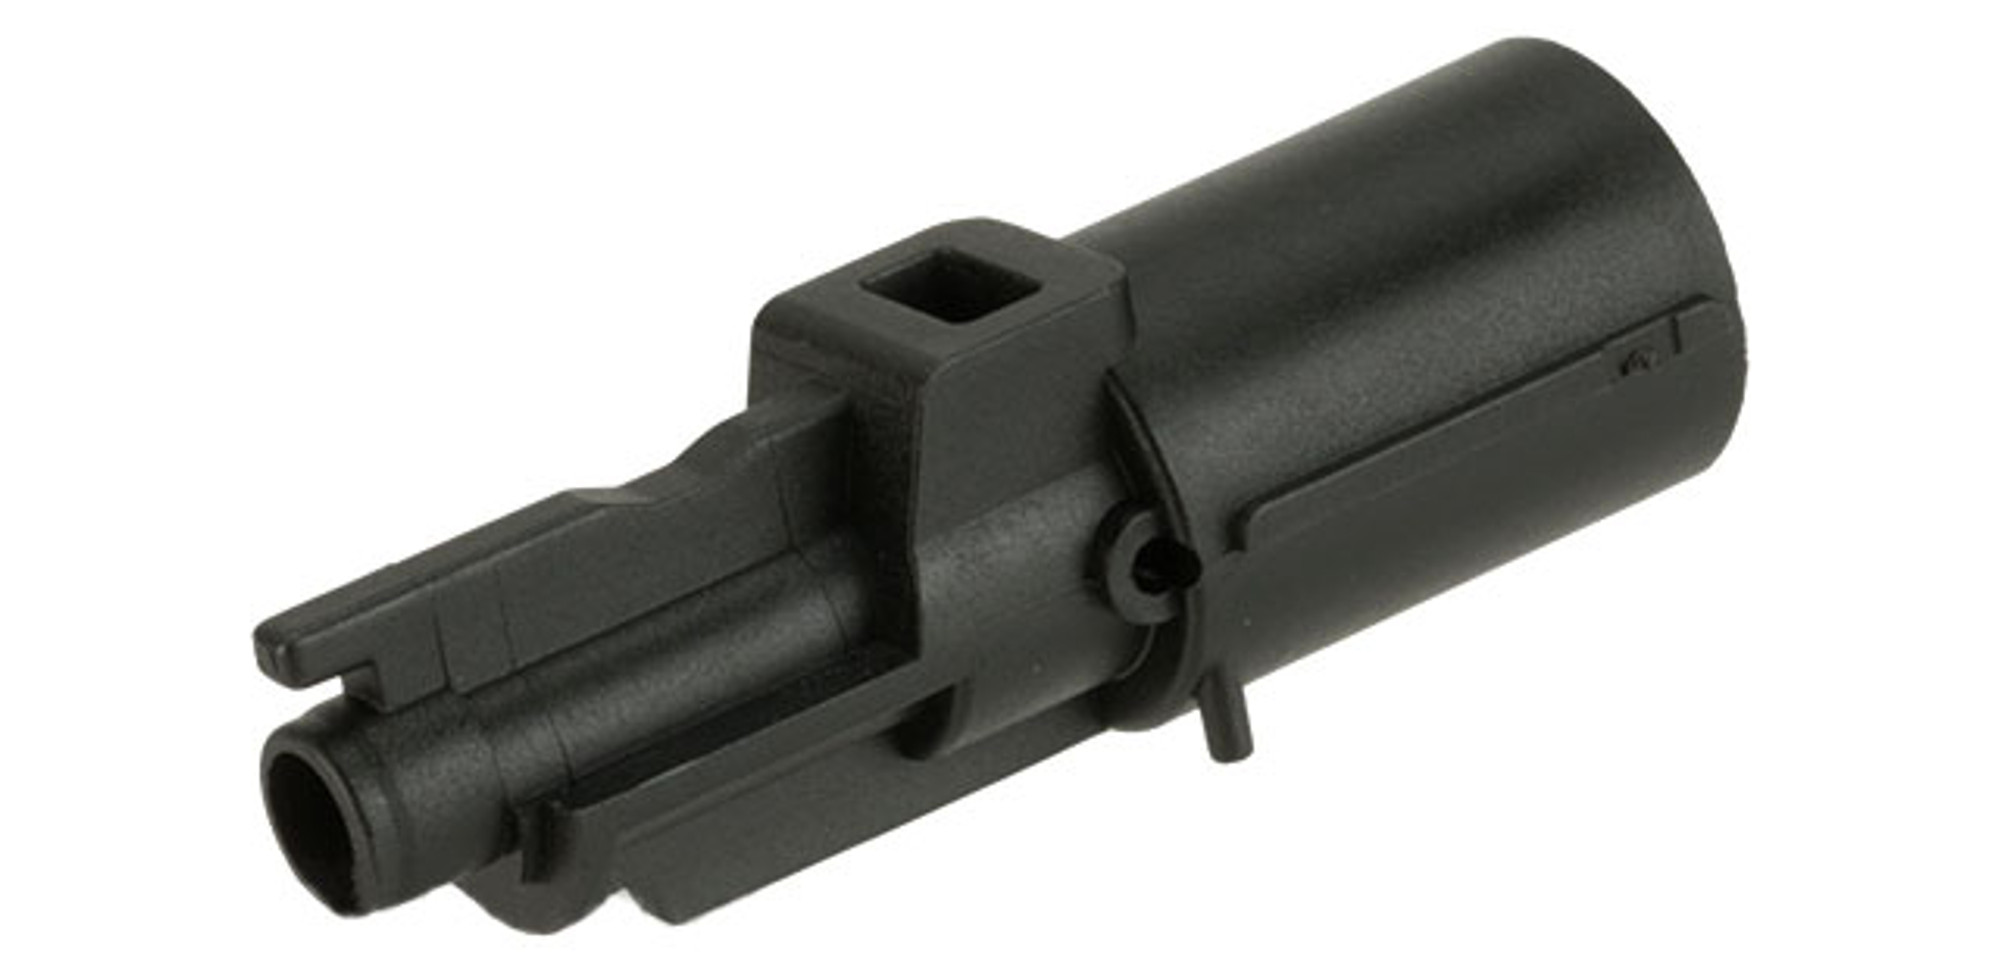 KWA Replacement Gas Cylinder / Nozzle for 1911 PTP Series Airsoft GBB Pistols